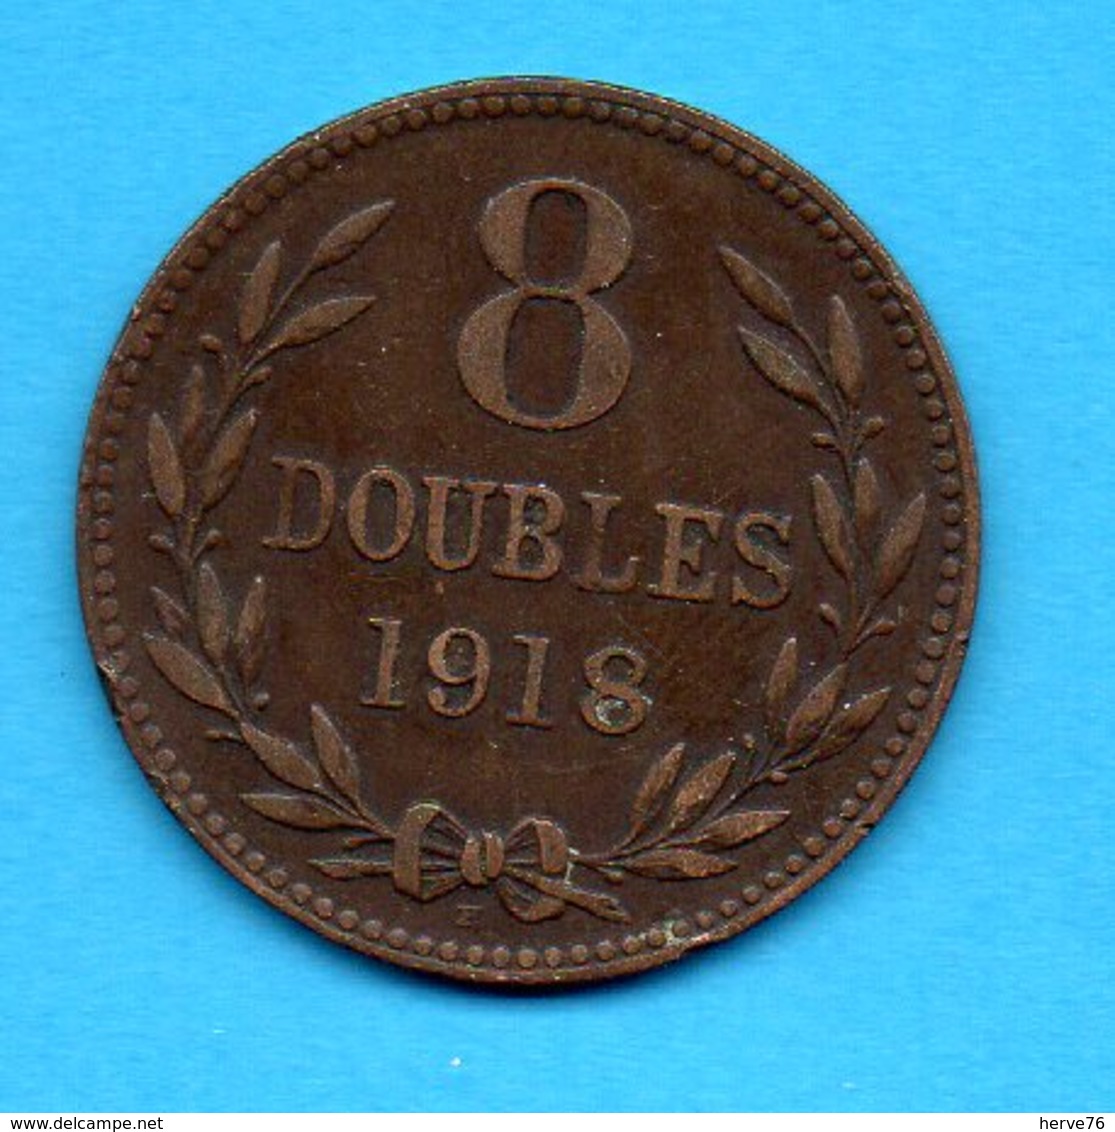 GUERNESEY - GUERNSEY - Pièce 8 Doubles 1918 - Guernesey